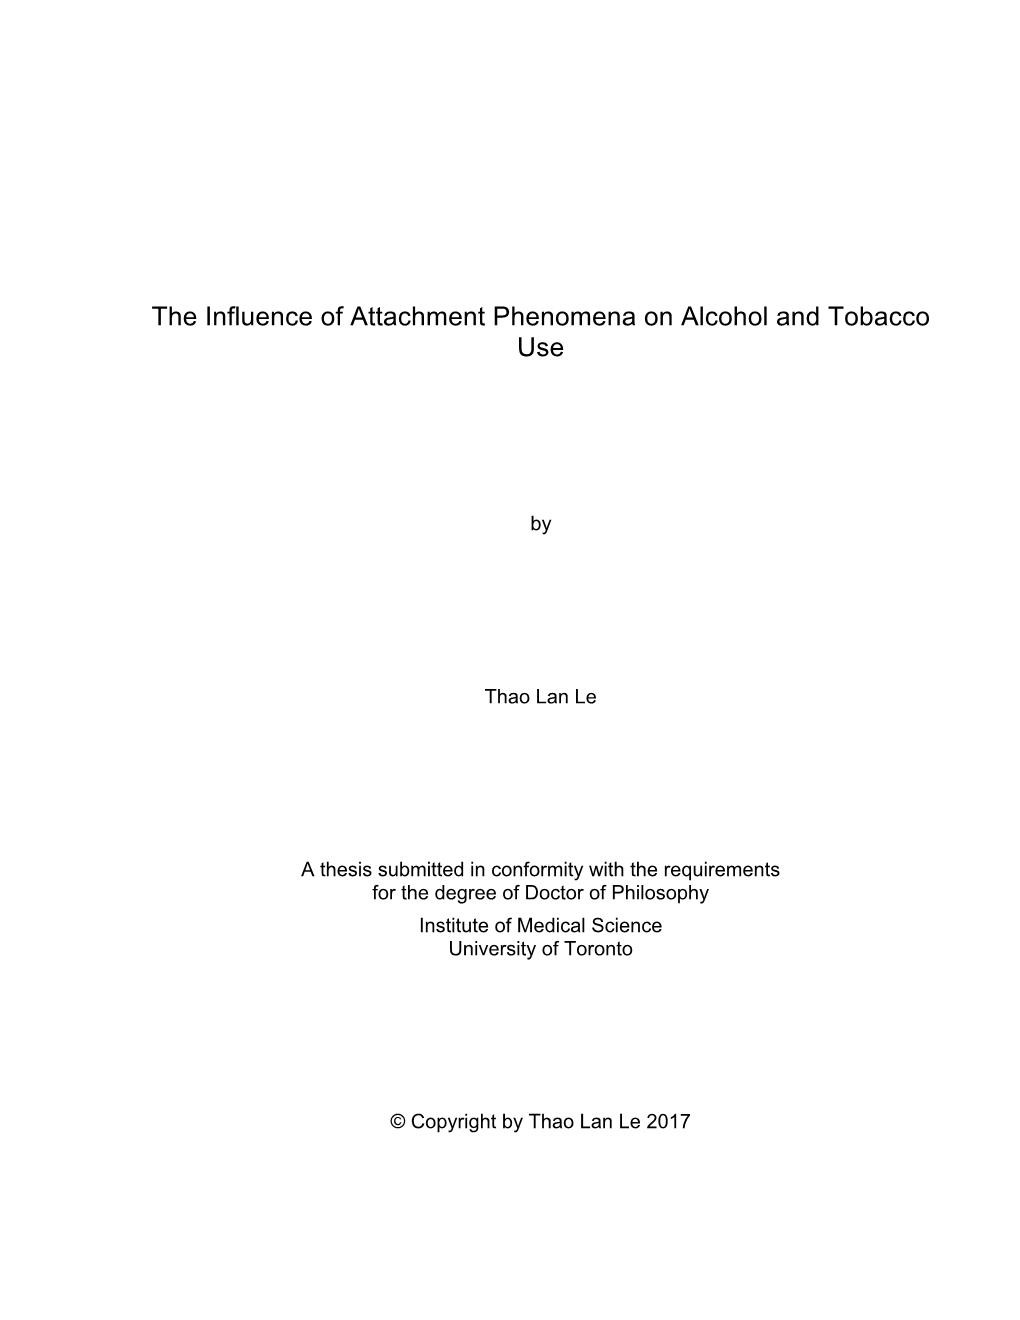 The Influence of Attachment Phenomena on Alcohol and Tobacco Use